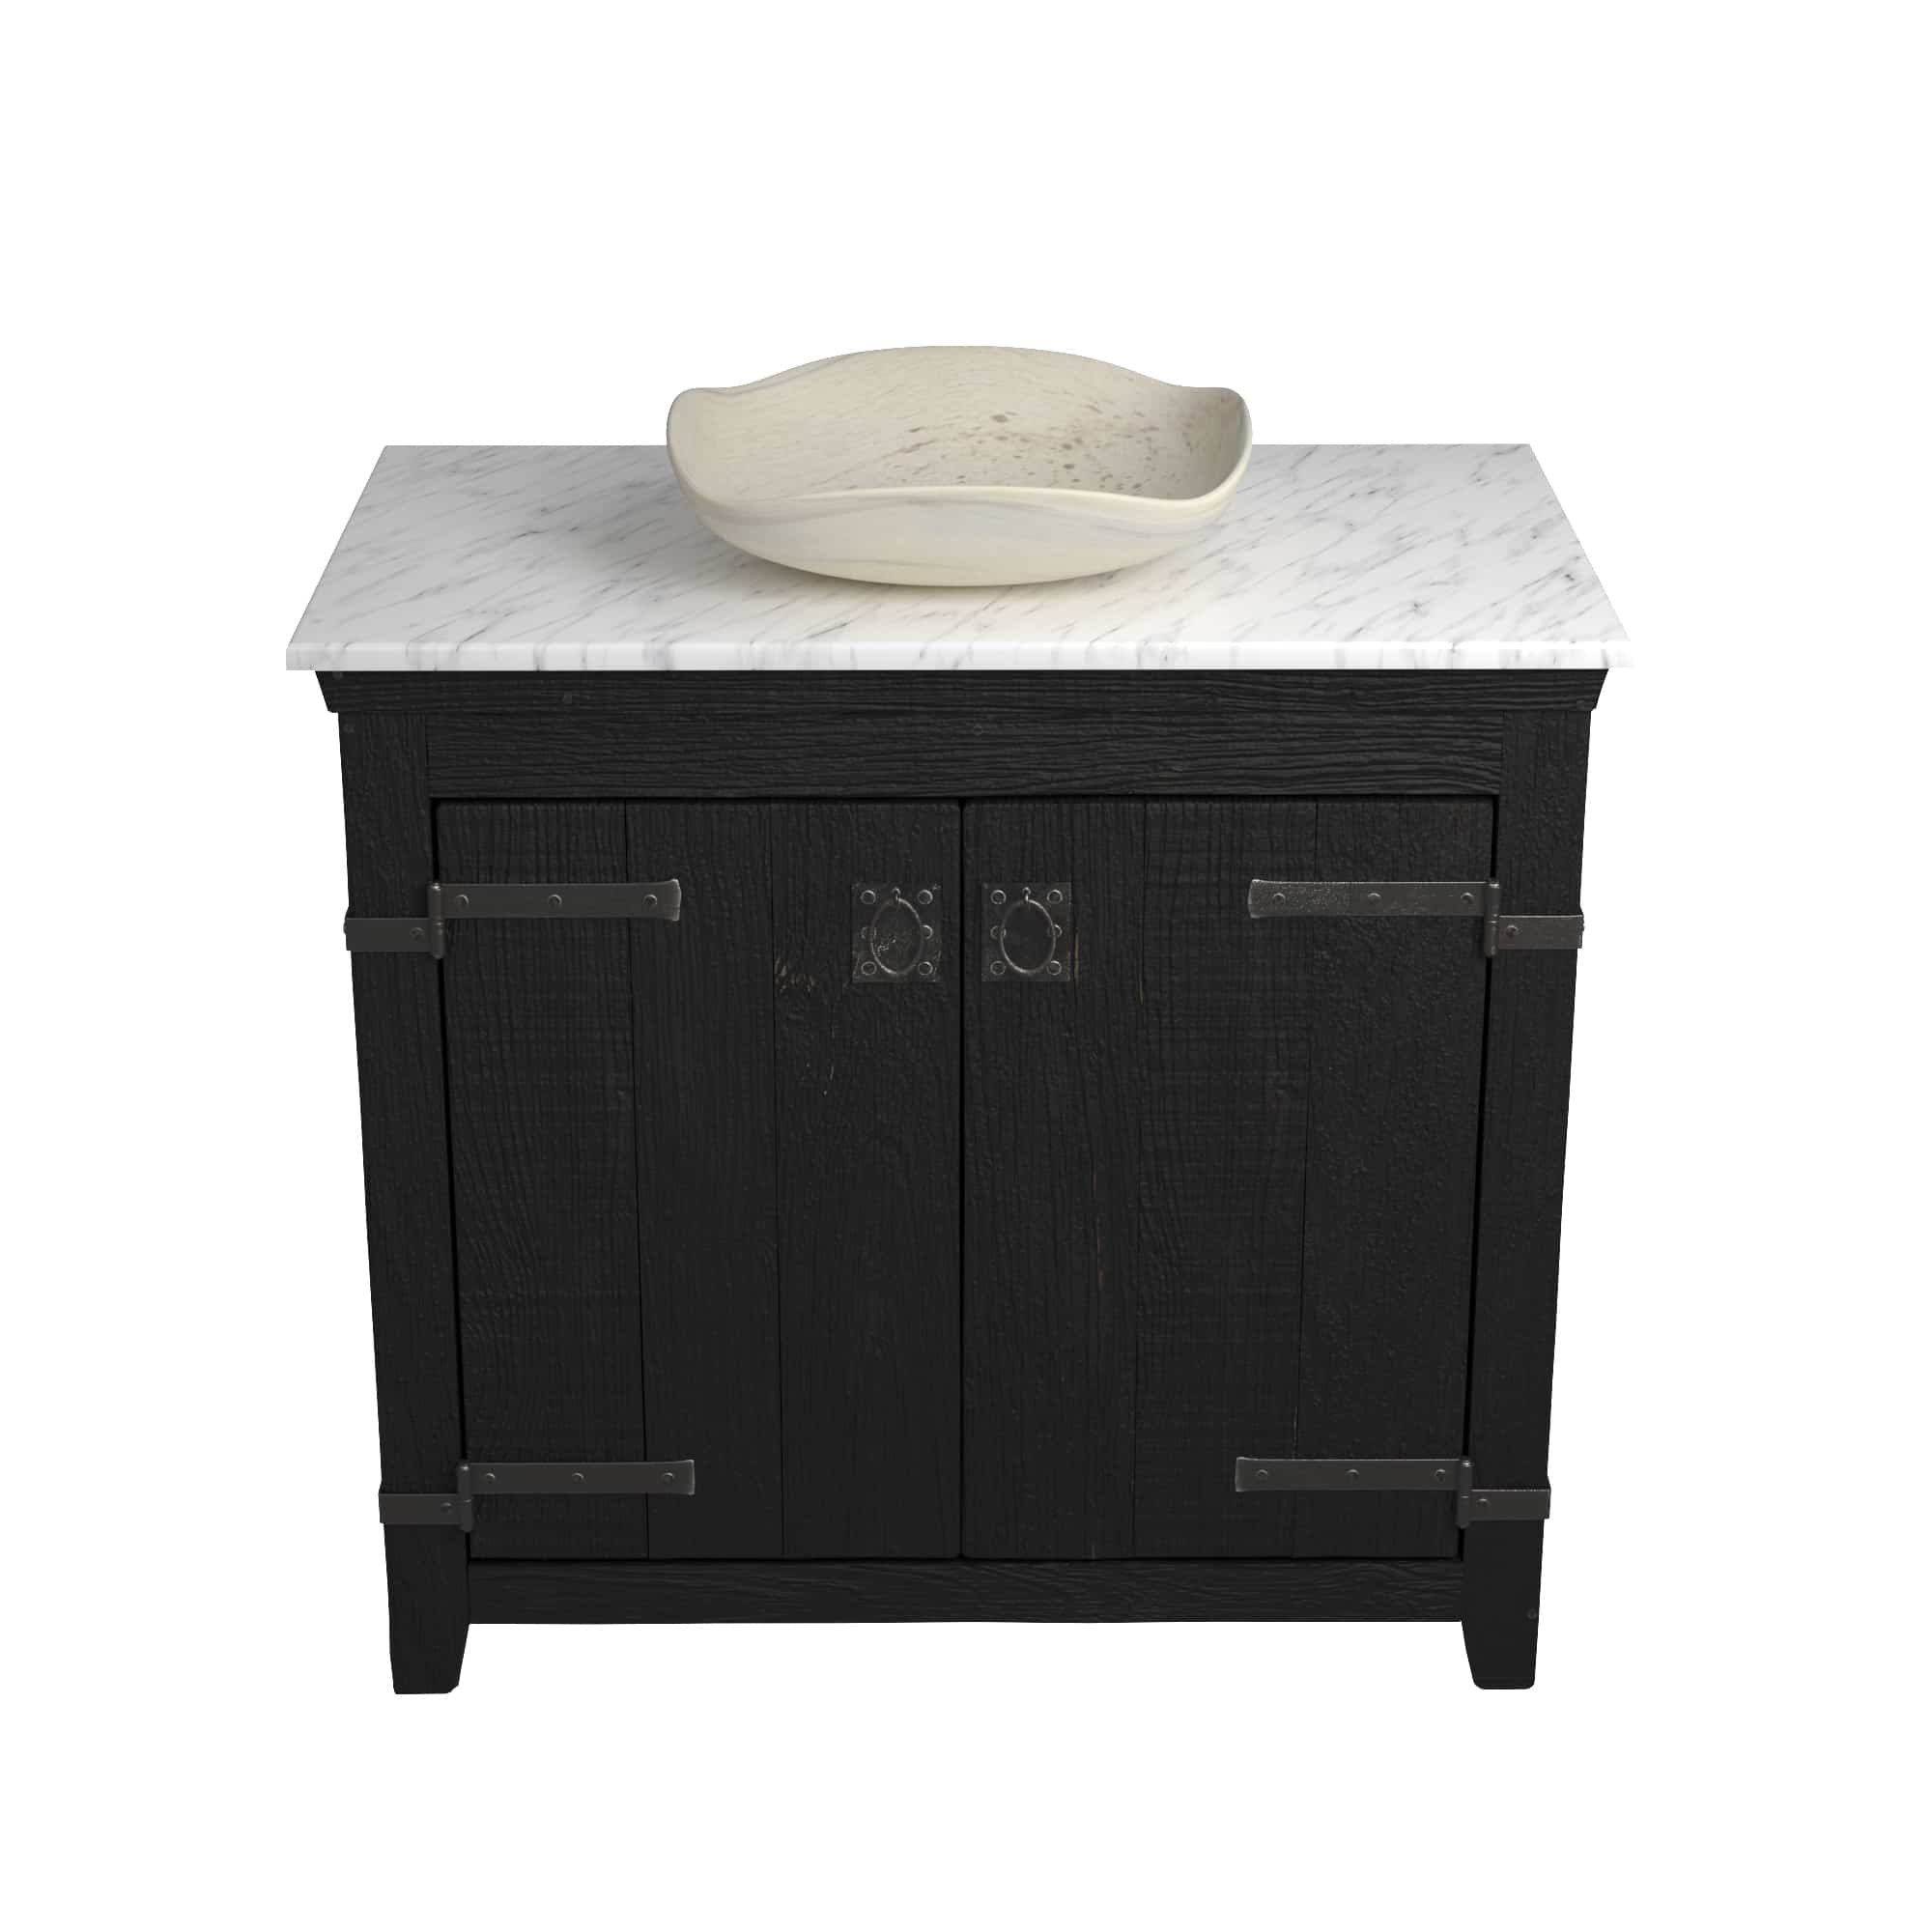 Native Trails 36" Americana Vanity in Anvil with Carrara Marble Top and Lido in Beachcomber, Single Faucet Hole, BND36-VB-CT-MG-021